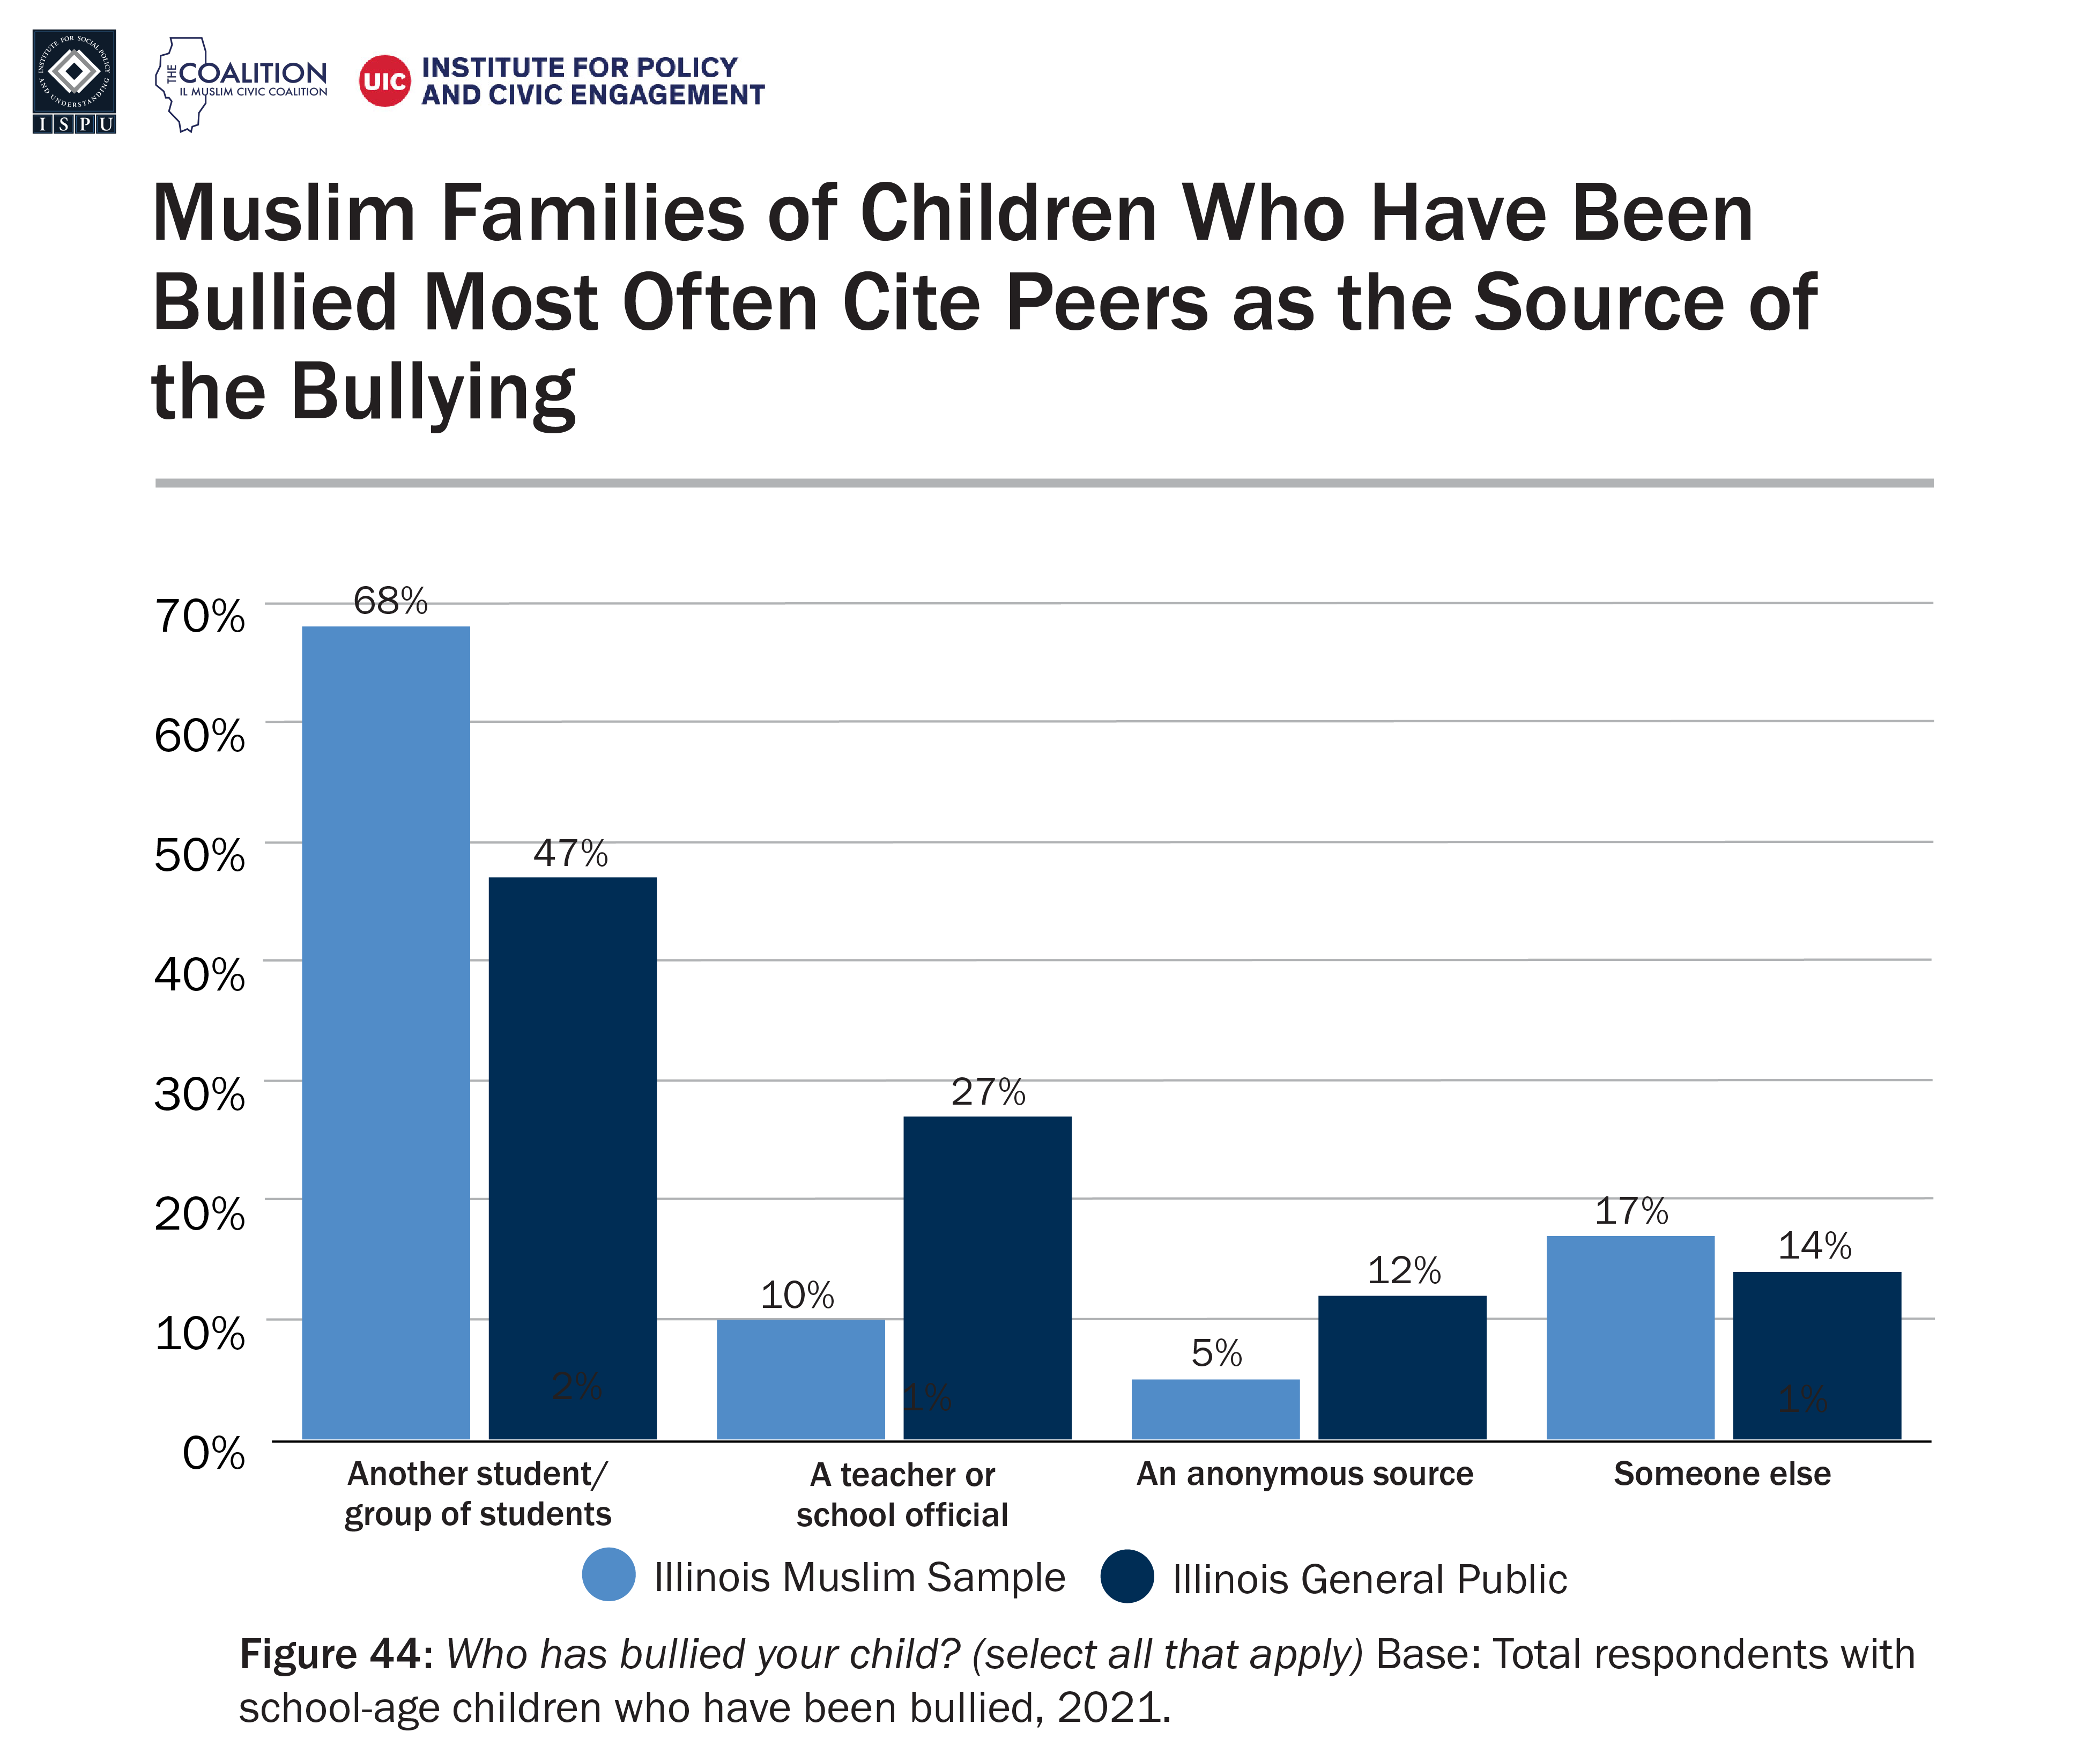 A bar graph showing reports of who has bullied their child among parents of school aged children in the Illinois Muslim sample and Illinois general public